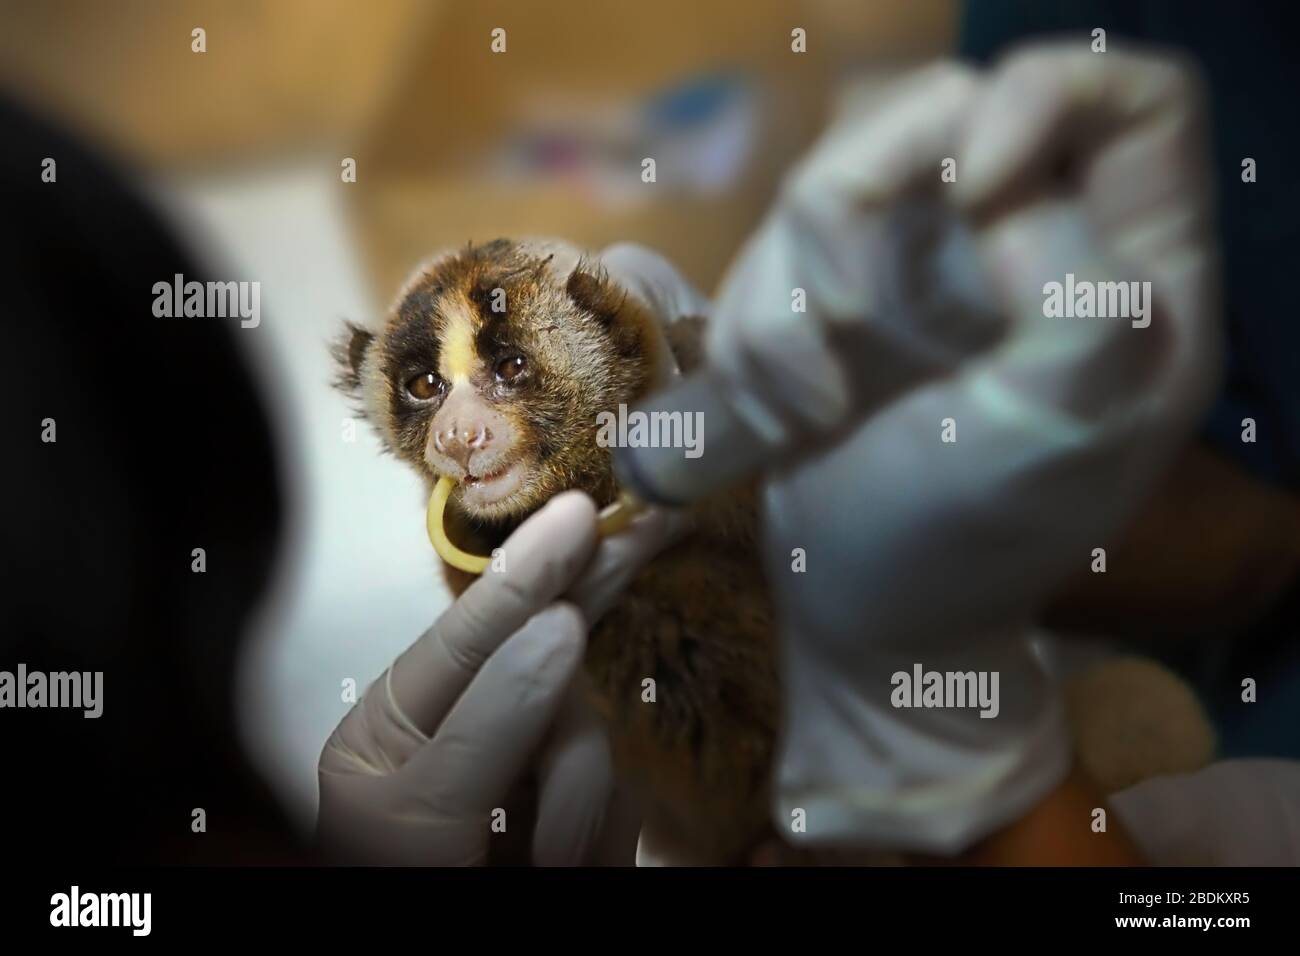 A slow loris is given medical tratment in an animal rehabilitation center operated by International Animal Rescue (IAR) in Indonesia. Stock Photo